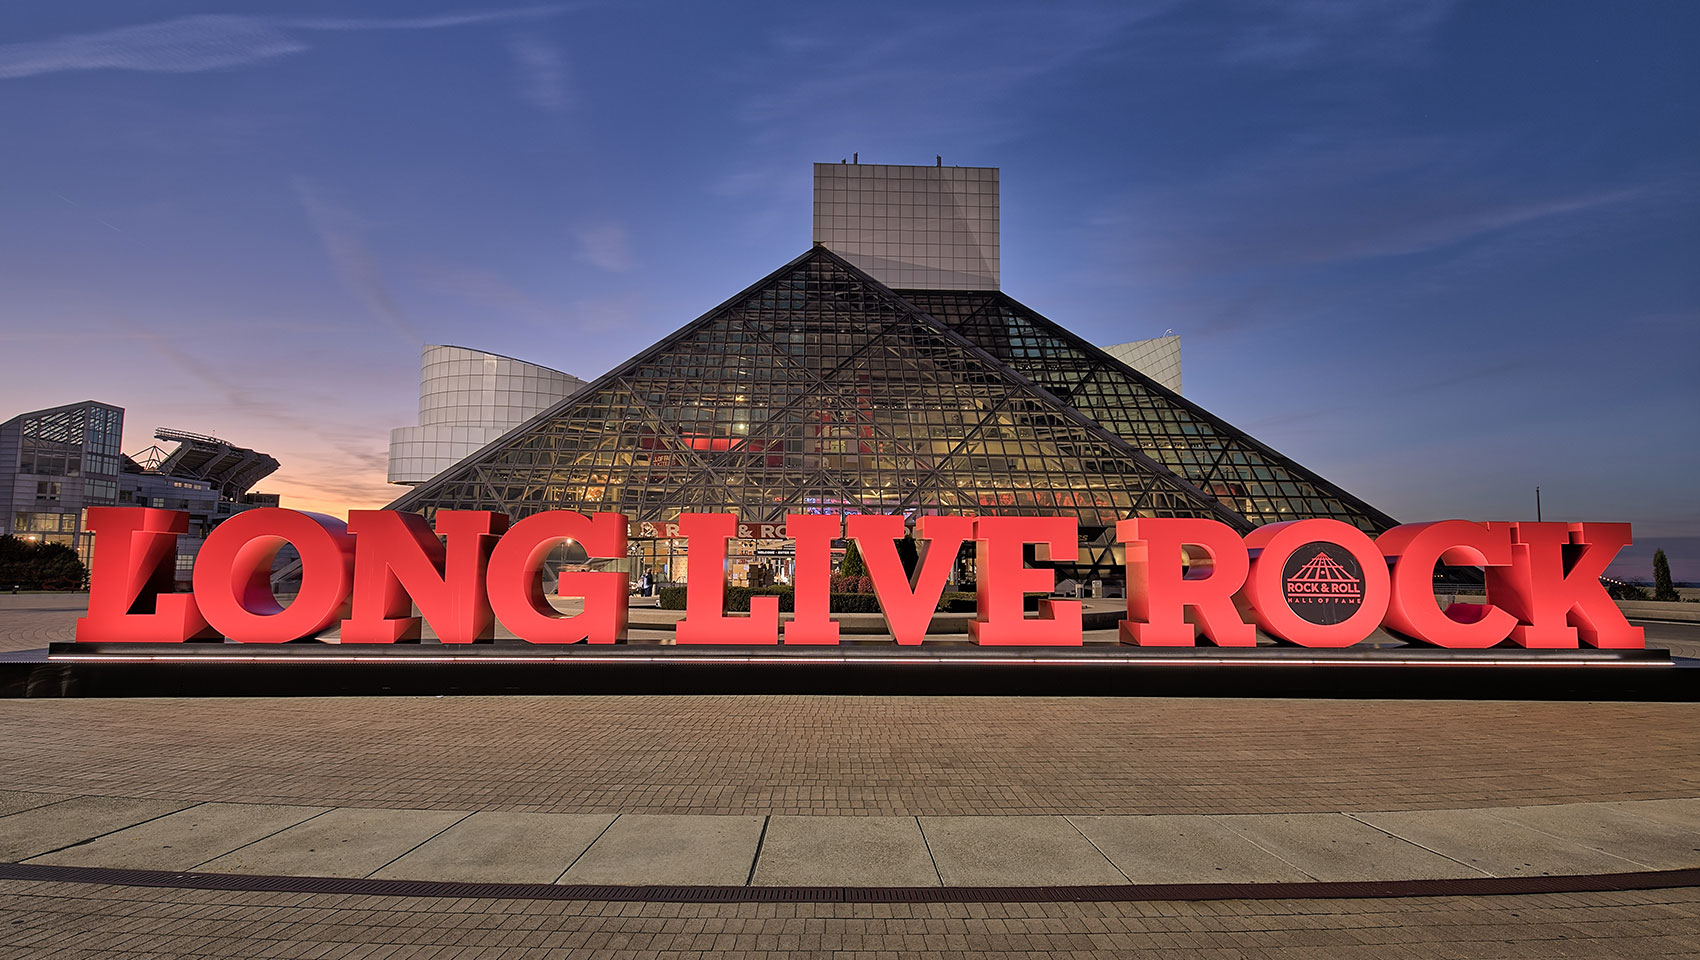 Rock & Roll Hall of Fame Cleveland